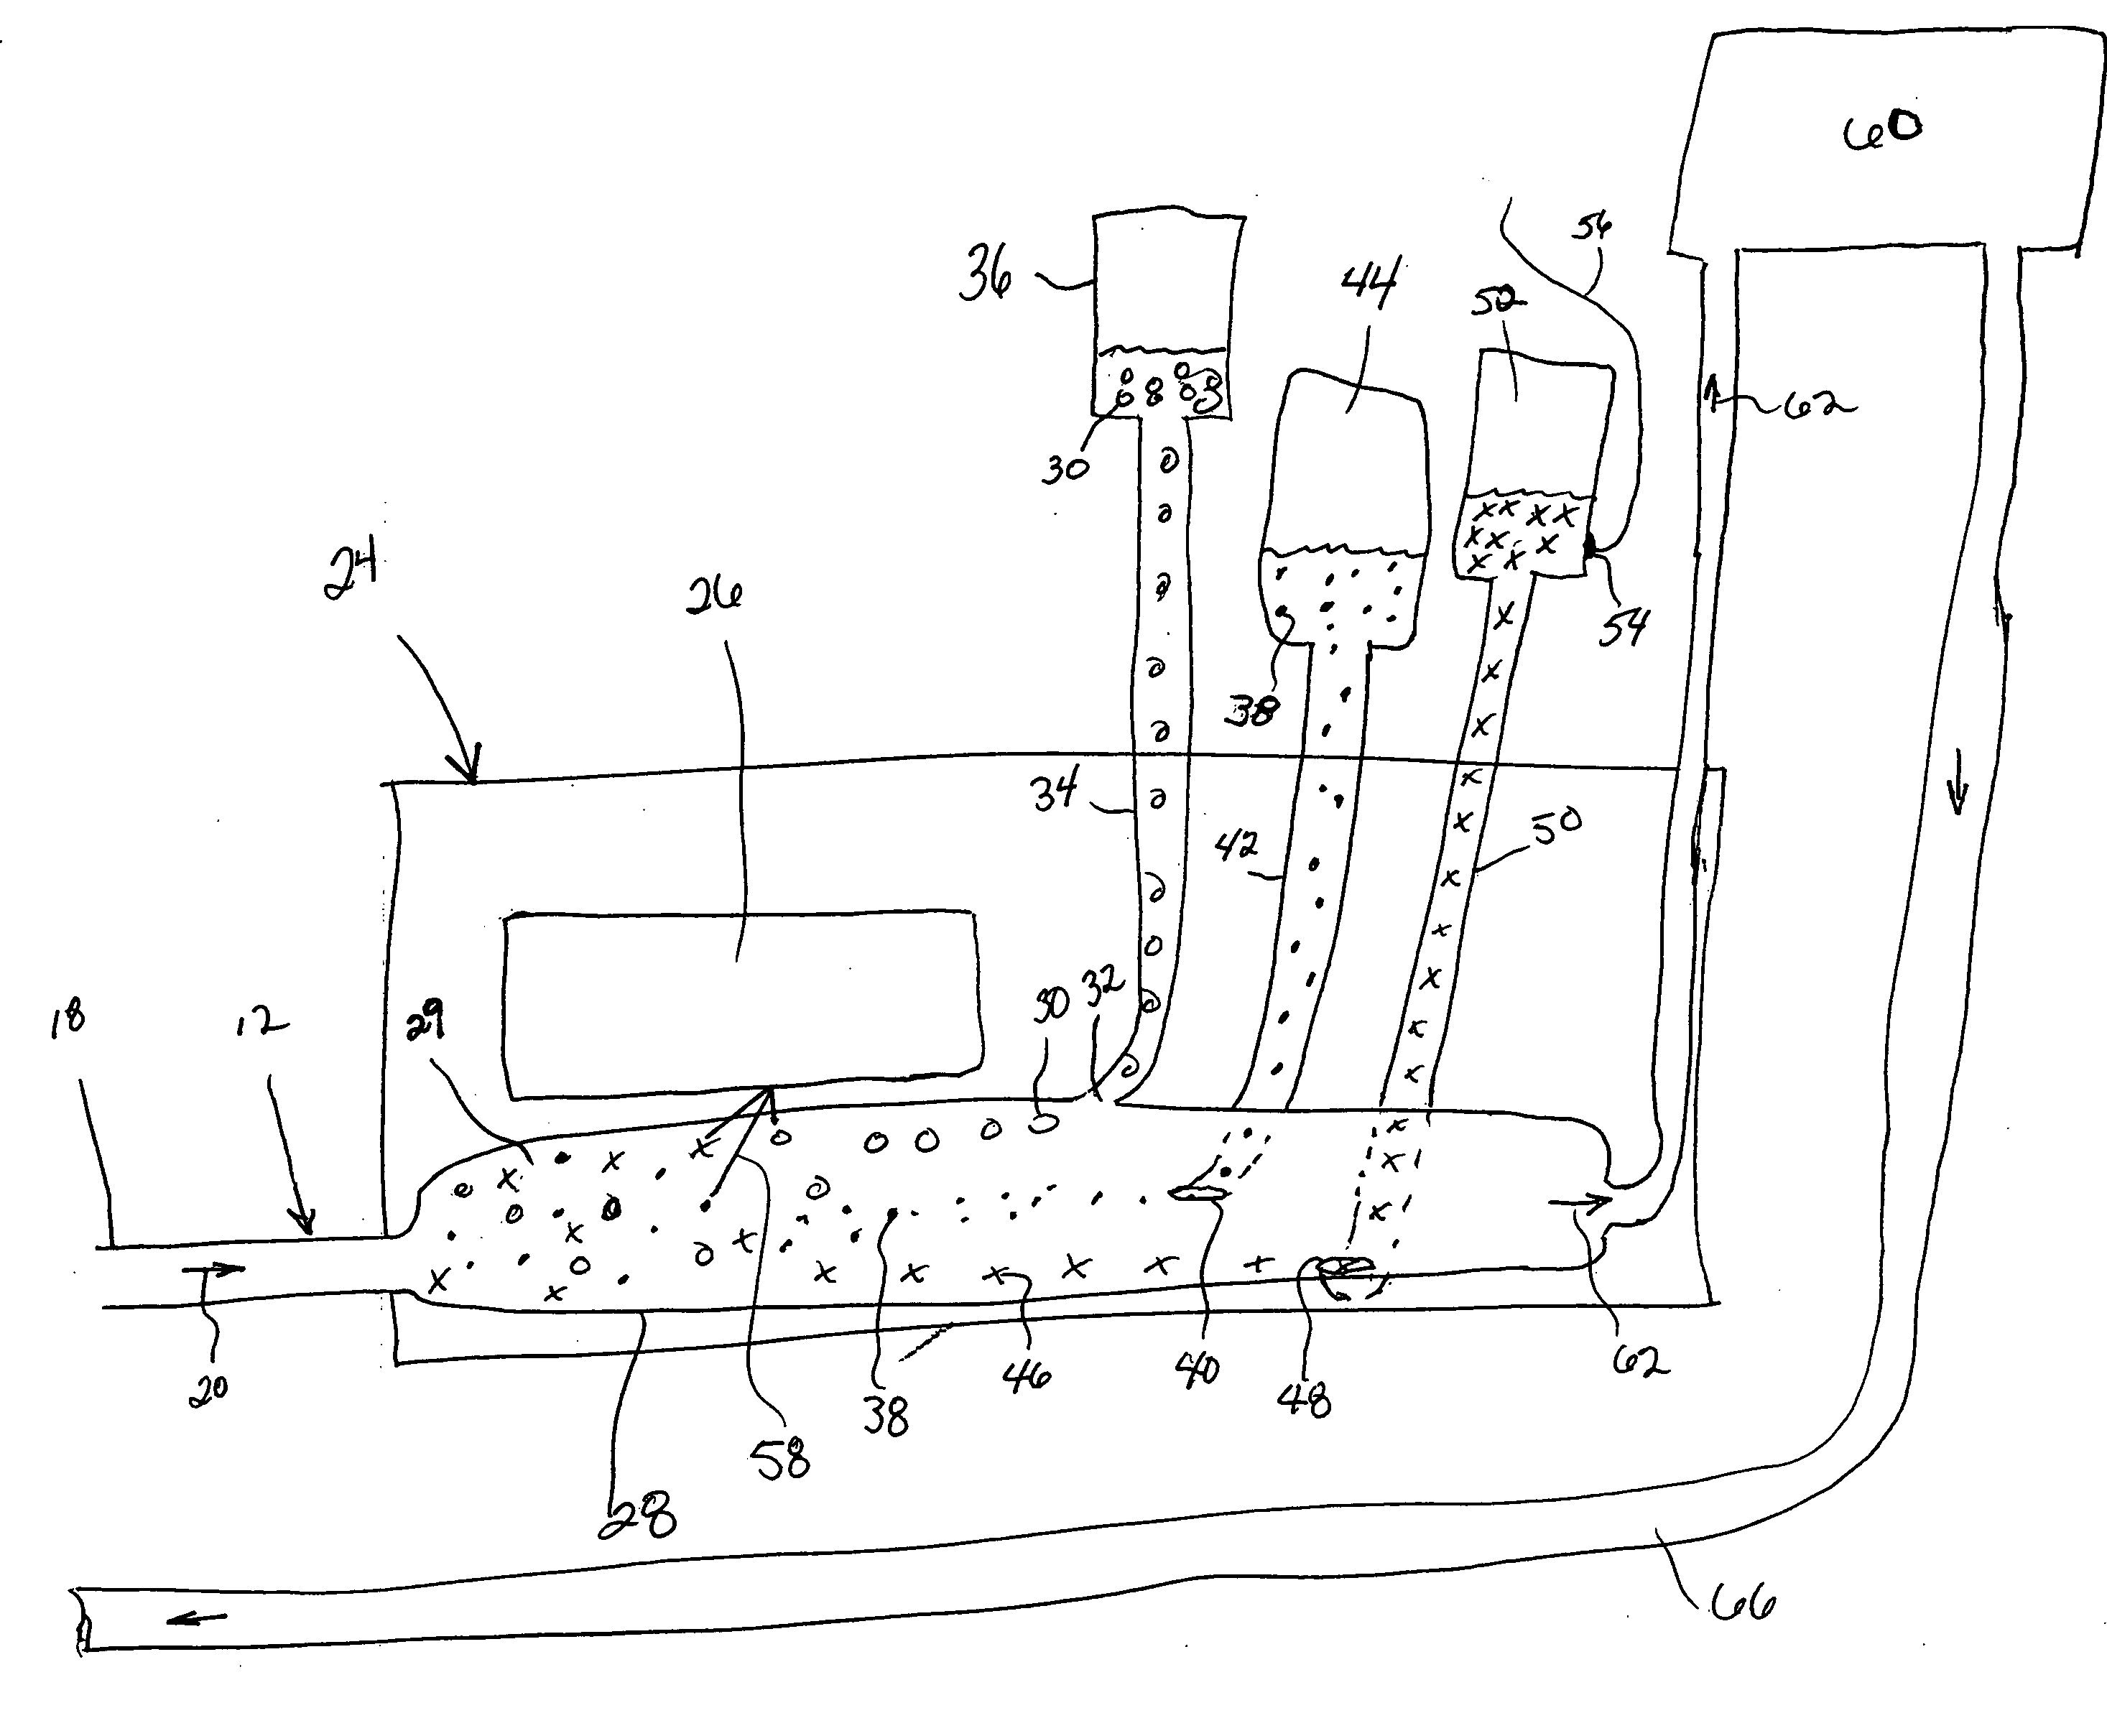 Blood component separation system with stationary separation chamber